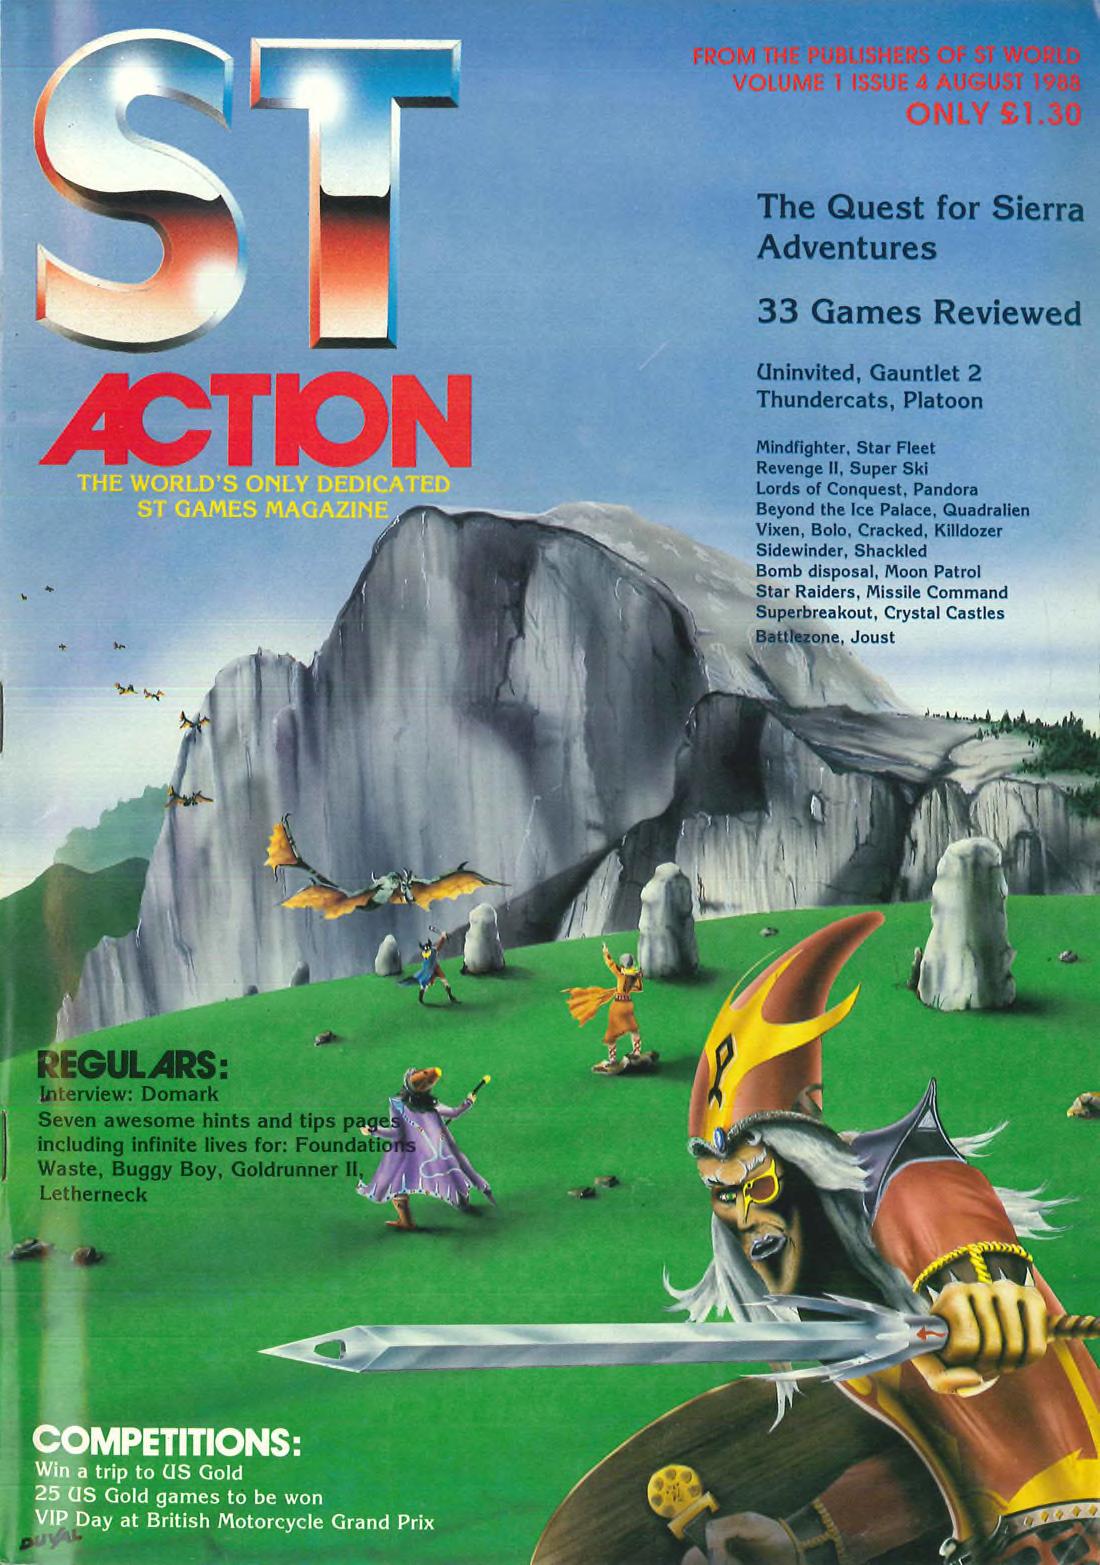 Cover for ST Action 4 Volume 1 Issue 4 (Aug 1998)